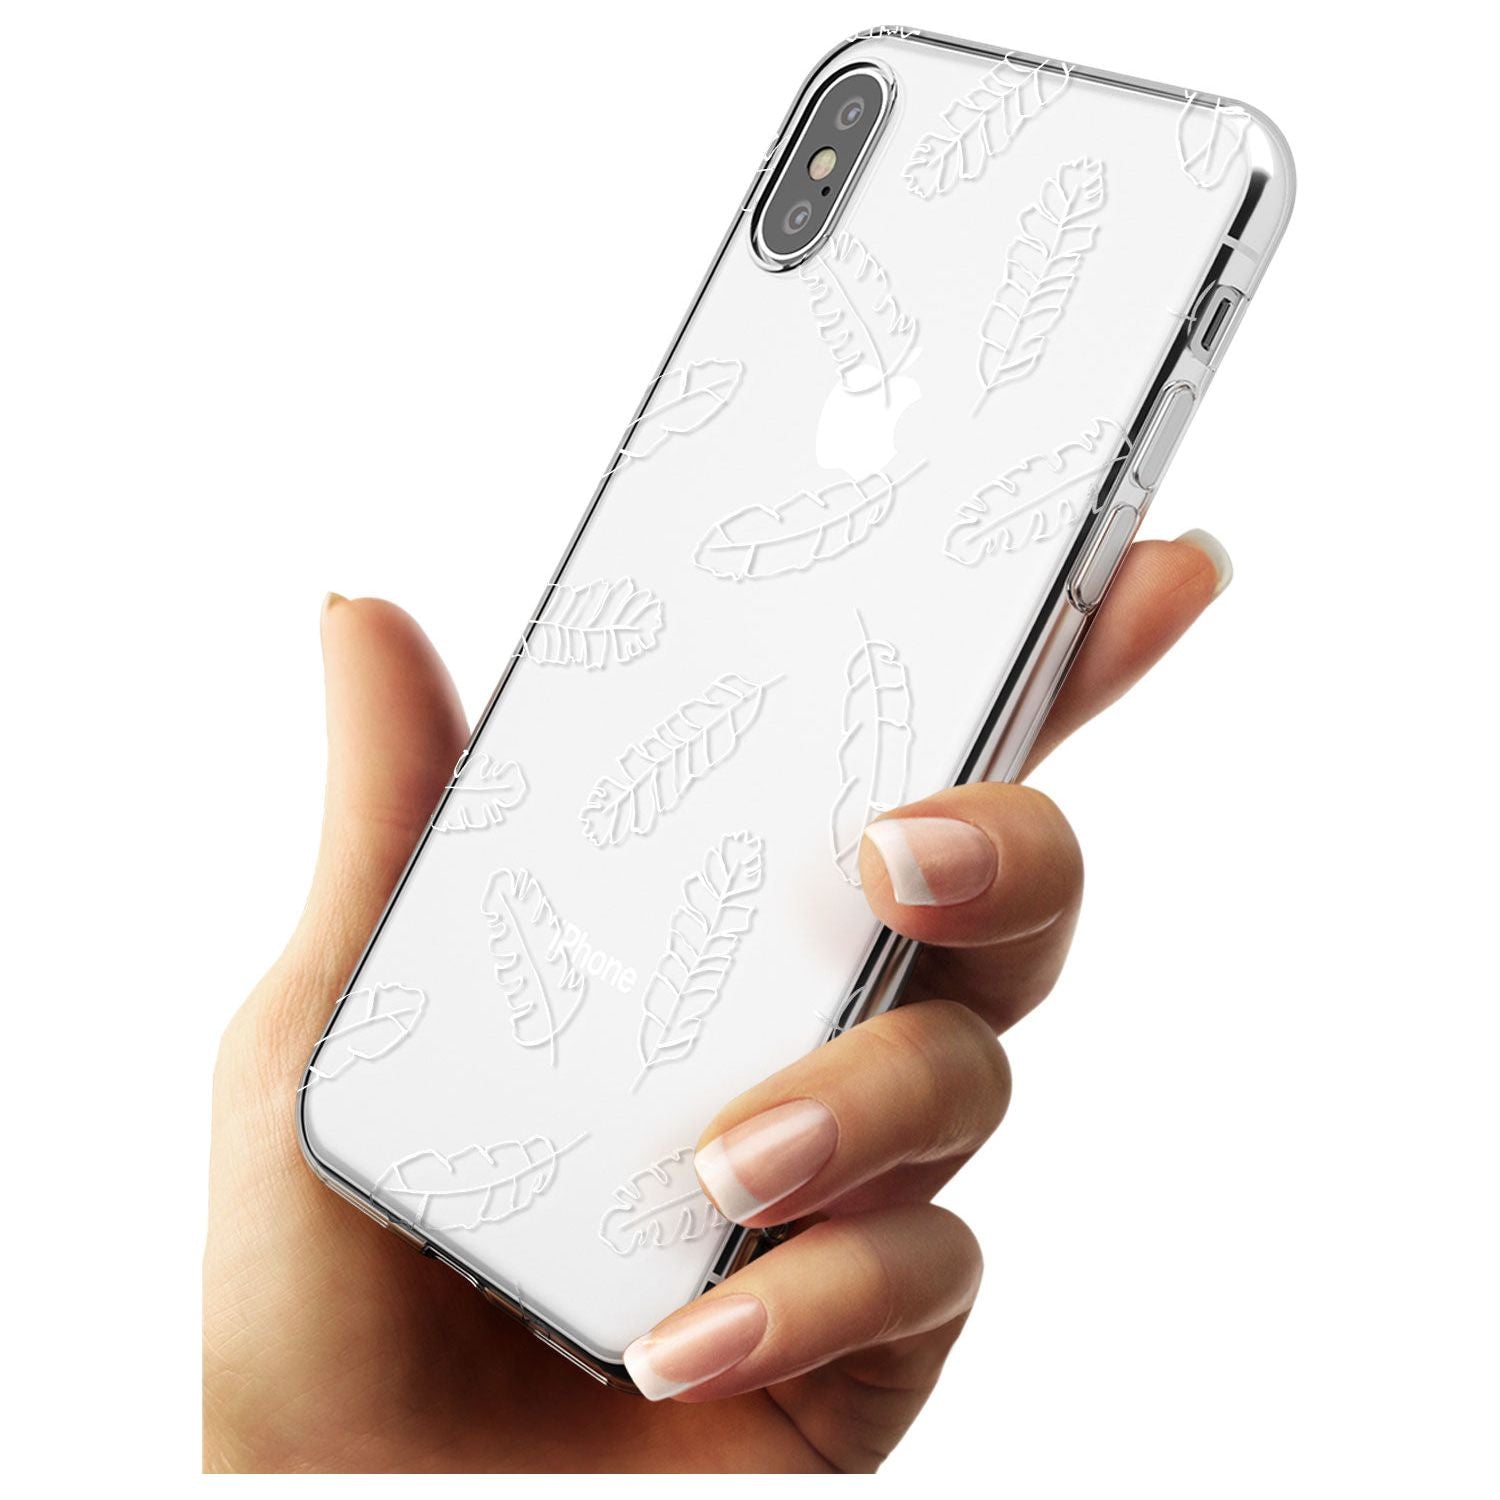 Clear Botanical Designs: Palm Leaves Black Impact Phone Case for iPhone X XS Max XR